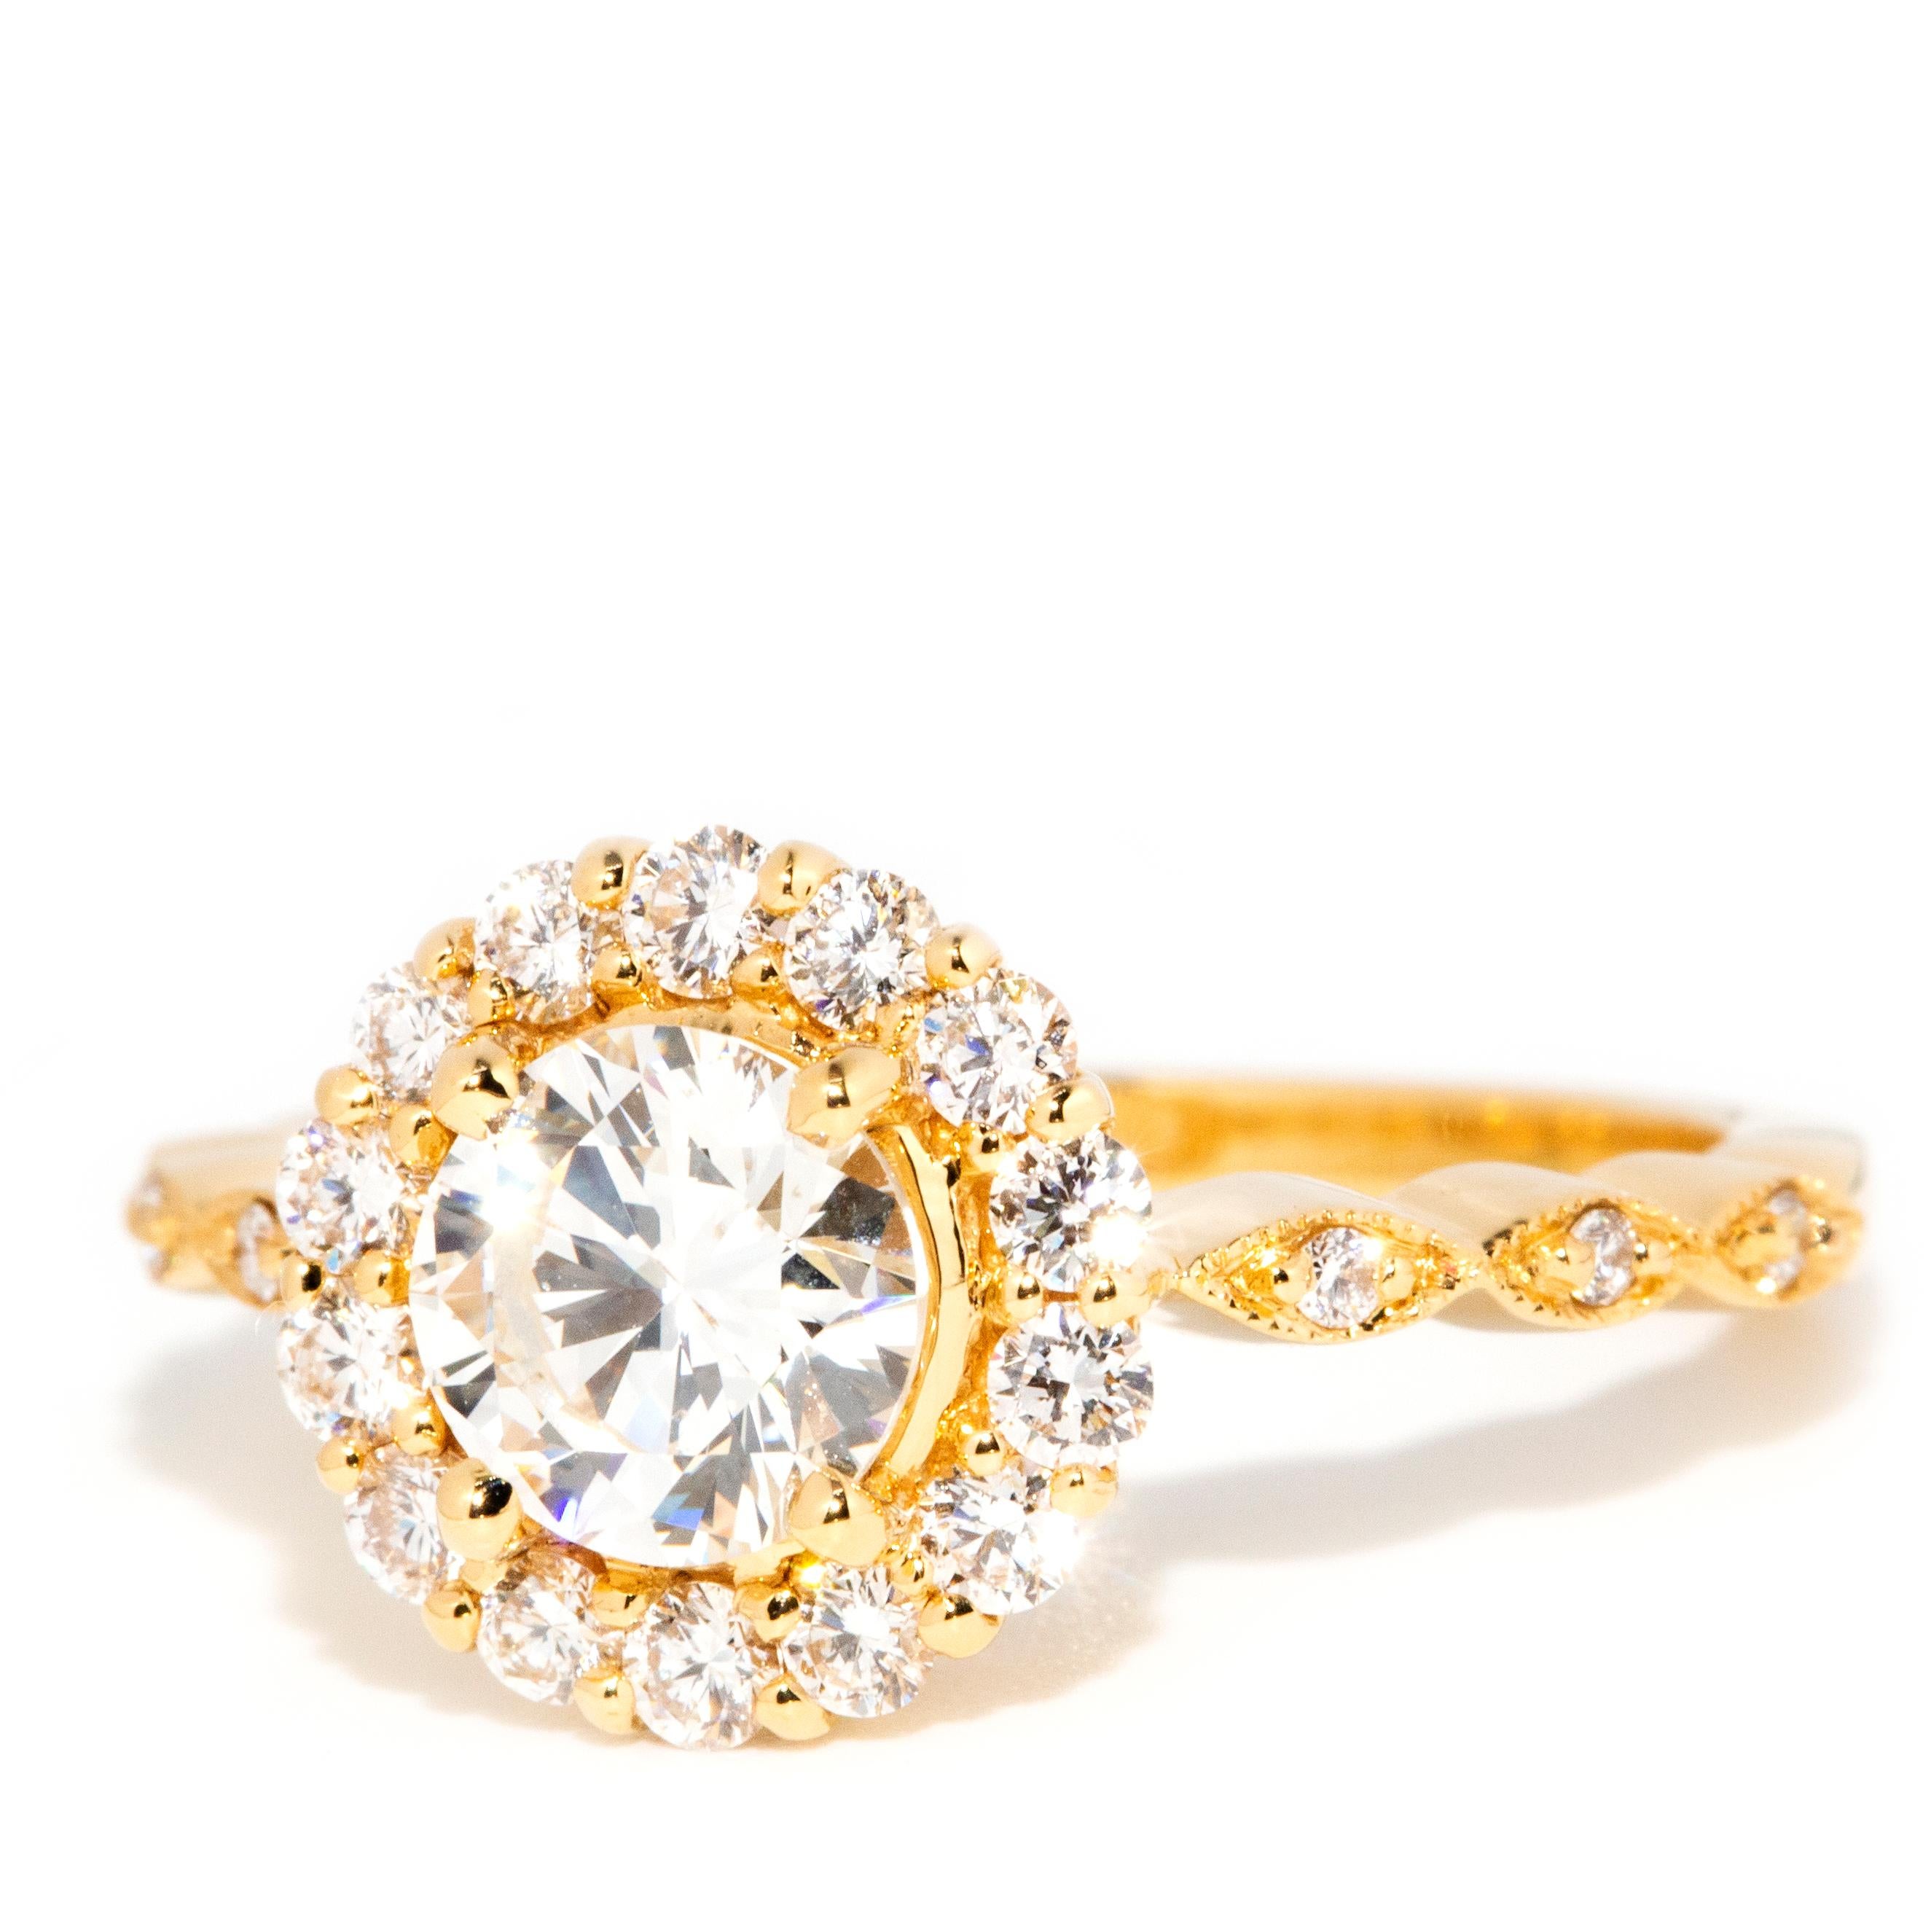 GIA Certified 1.01 Carat Diamond Halo Cluster Ring in 18 Carat Yellow Gold For Sale 3